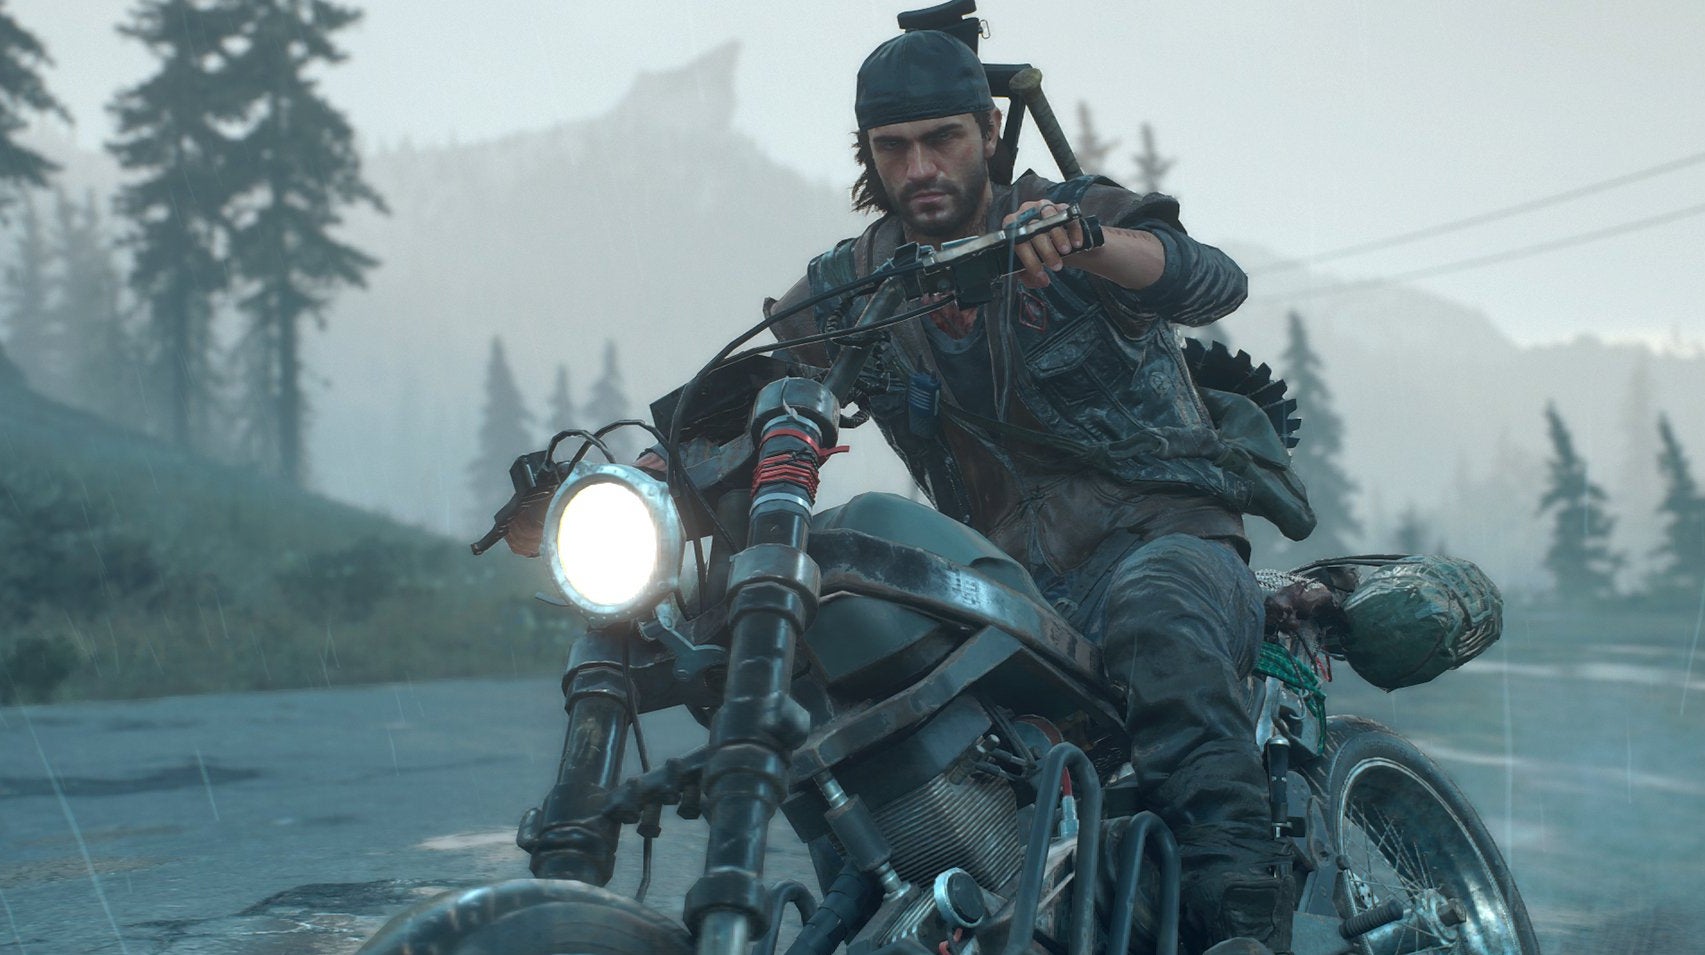 Image for Days Gone director discusses sequel ideas